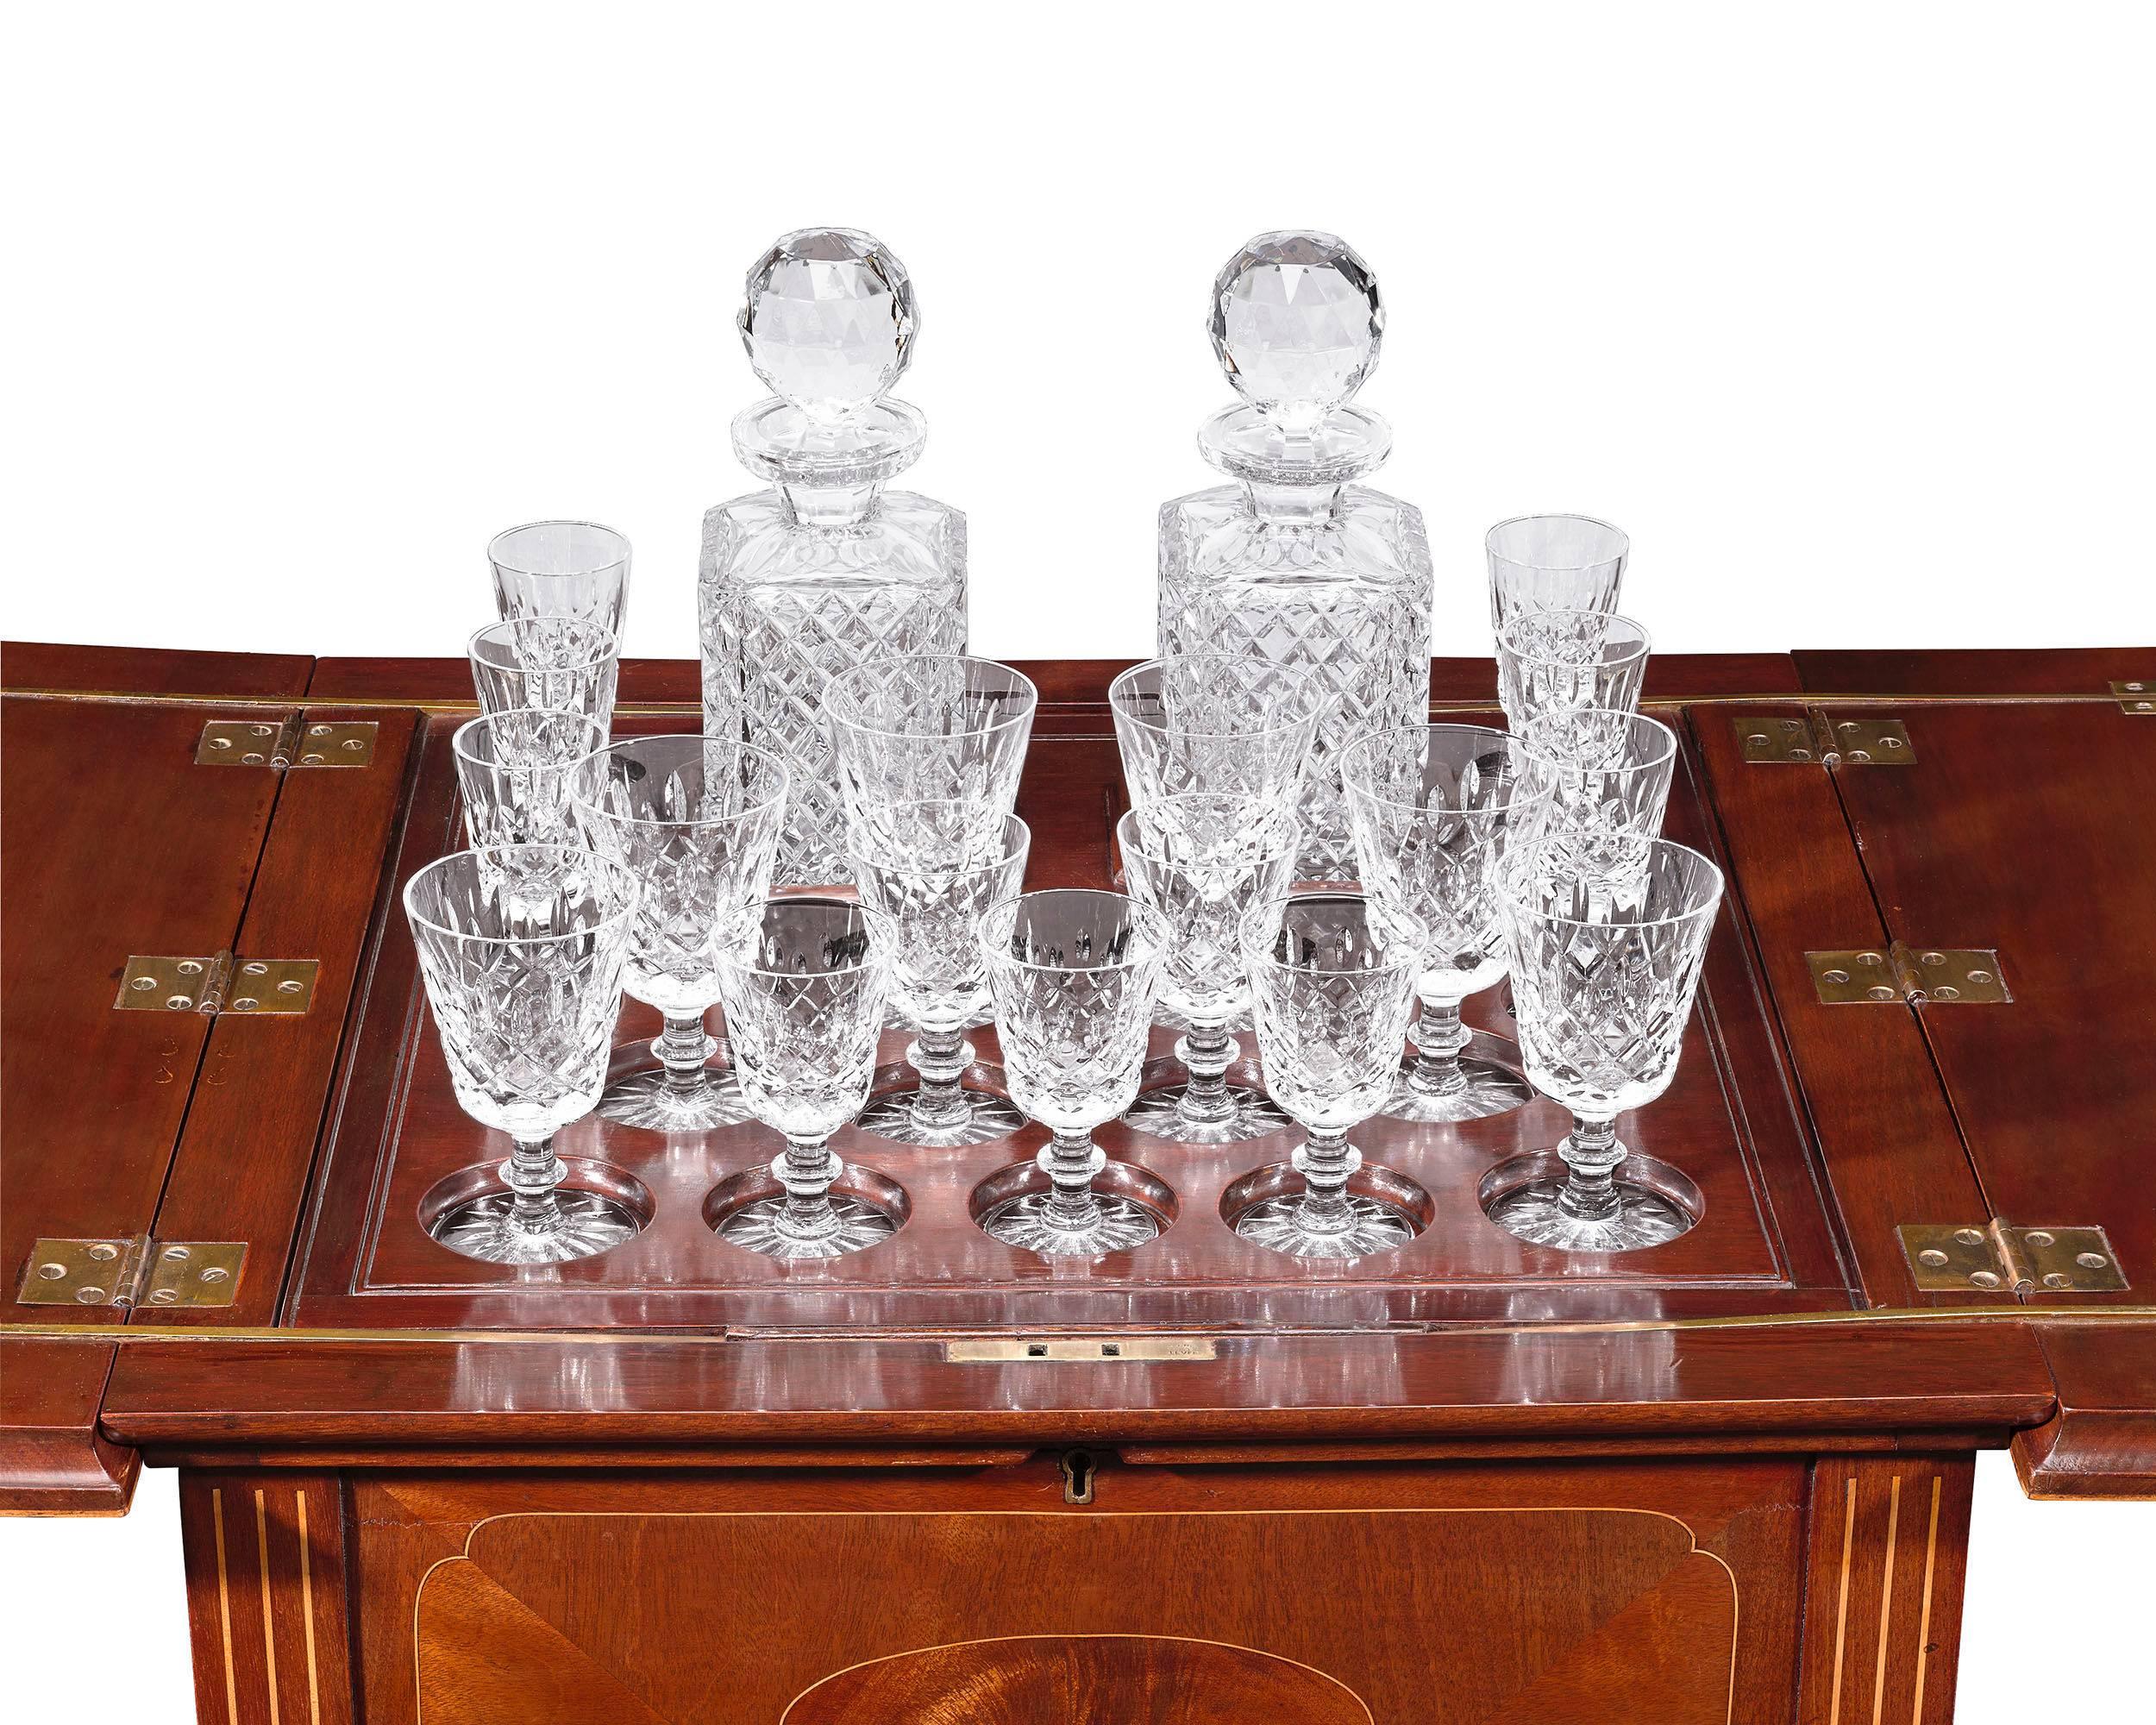 This outstanding, ingeniously designed bar brings style to any cocktail party. Also known as a 